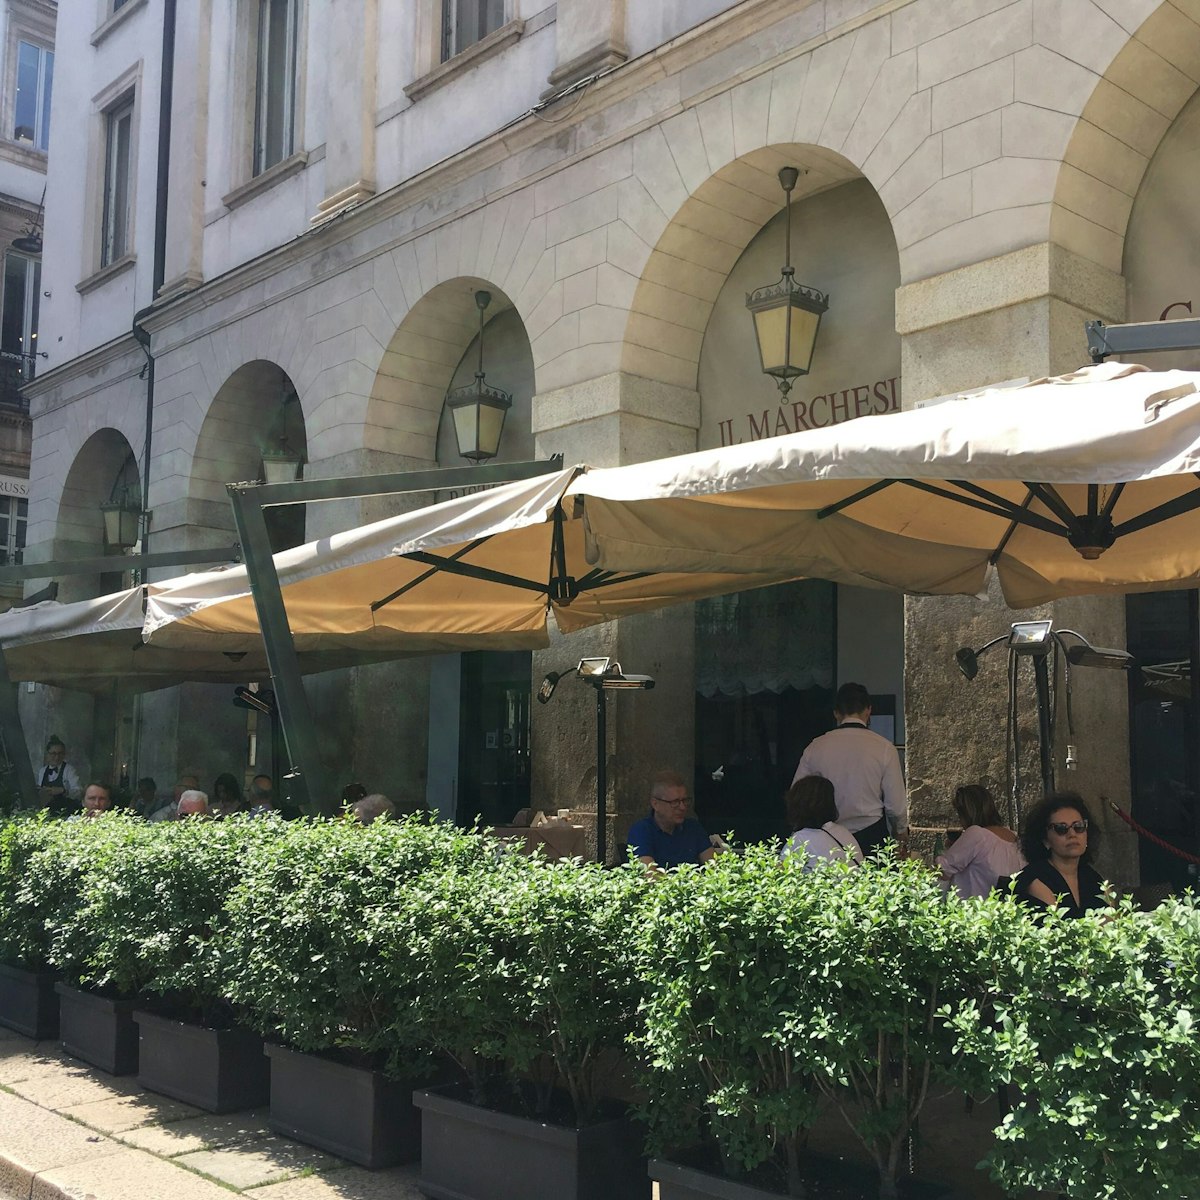 Diners outside the Il Marchesino restaurant.